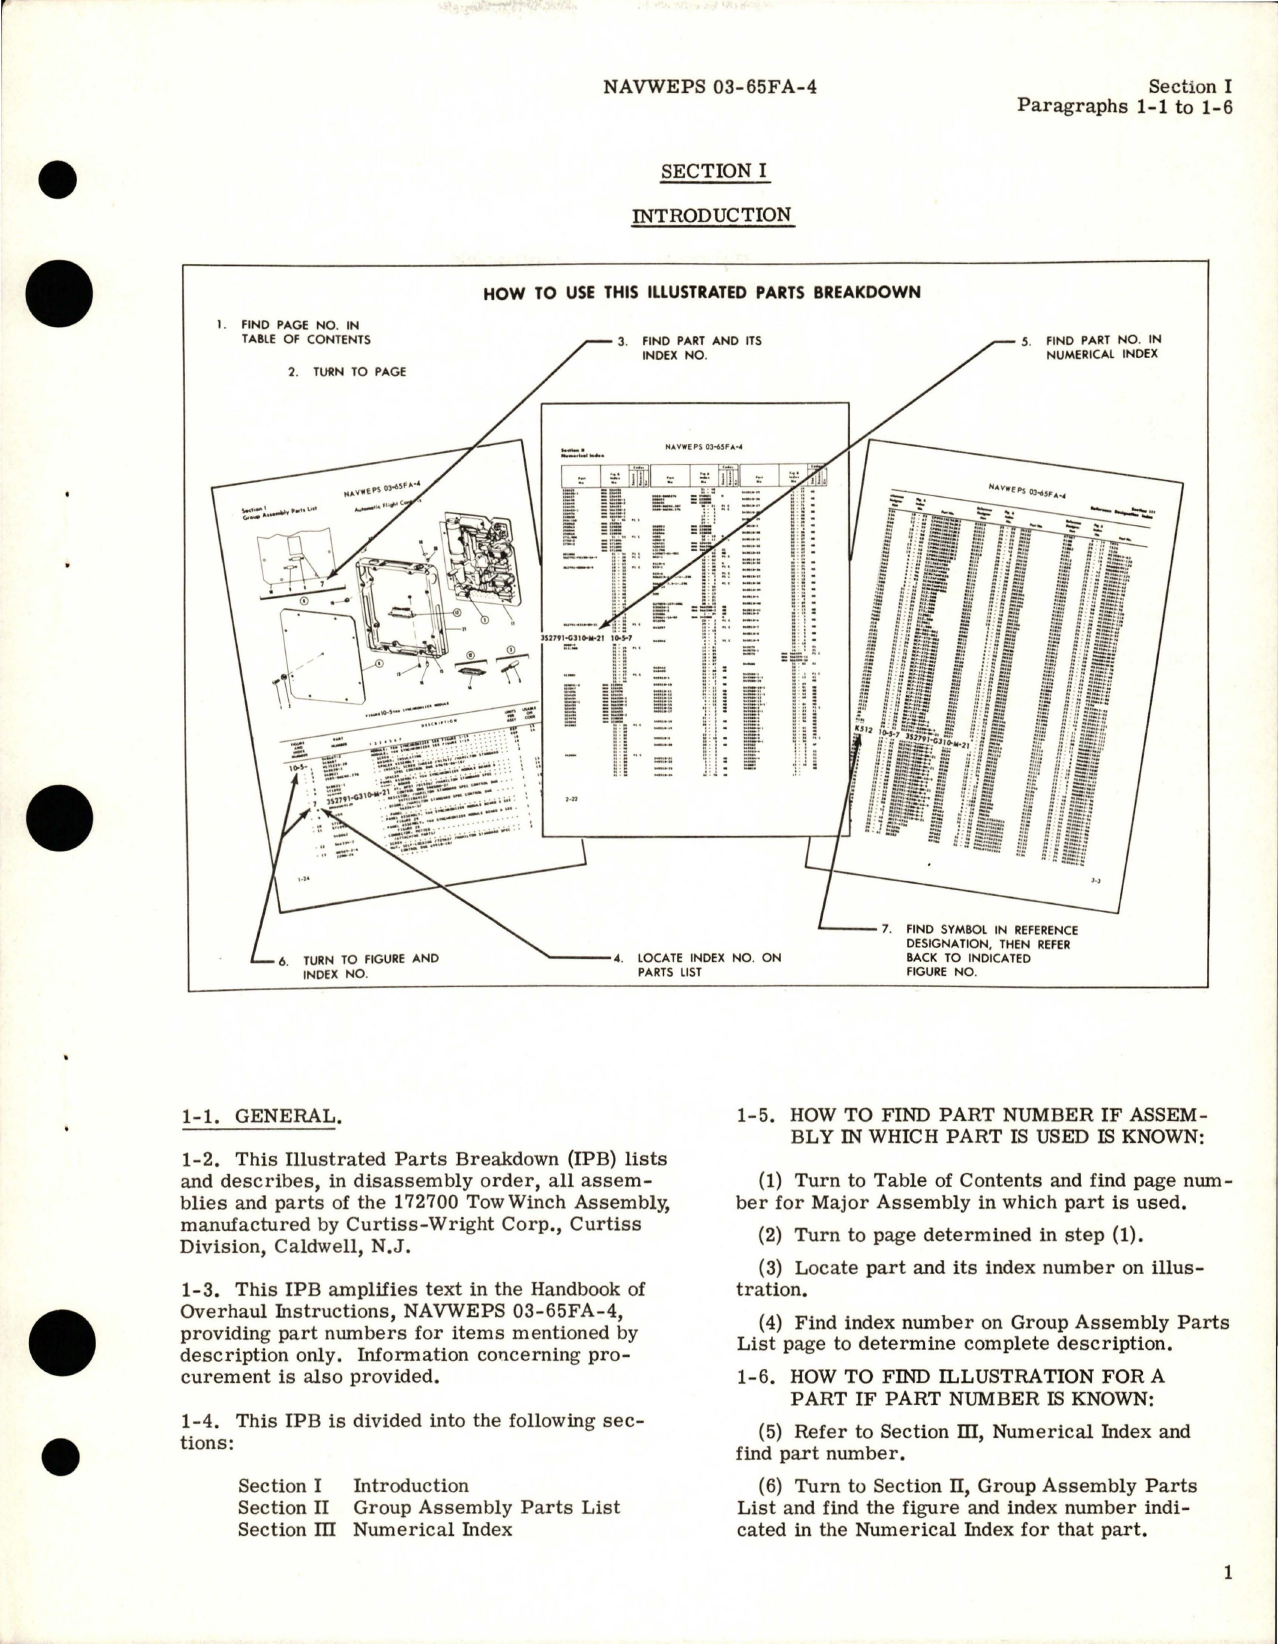 Sample page 5 from AirCorps Library document: Illustrated Parts Breakdown for Tow Winch Assembly - Part 172700 